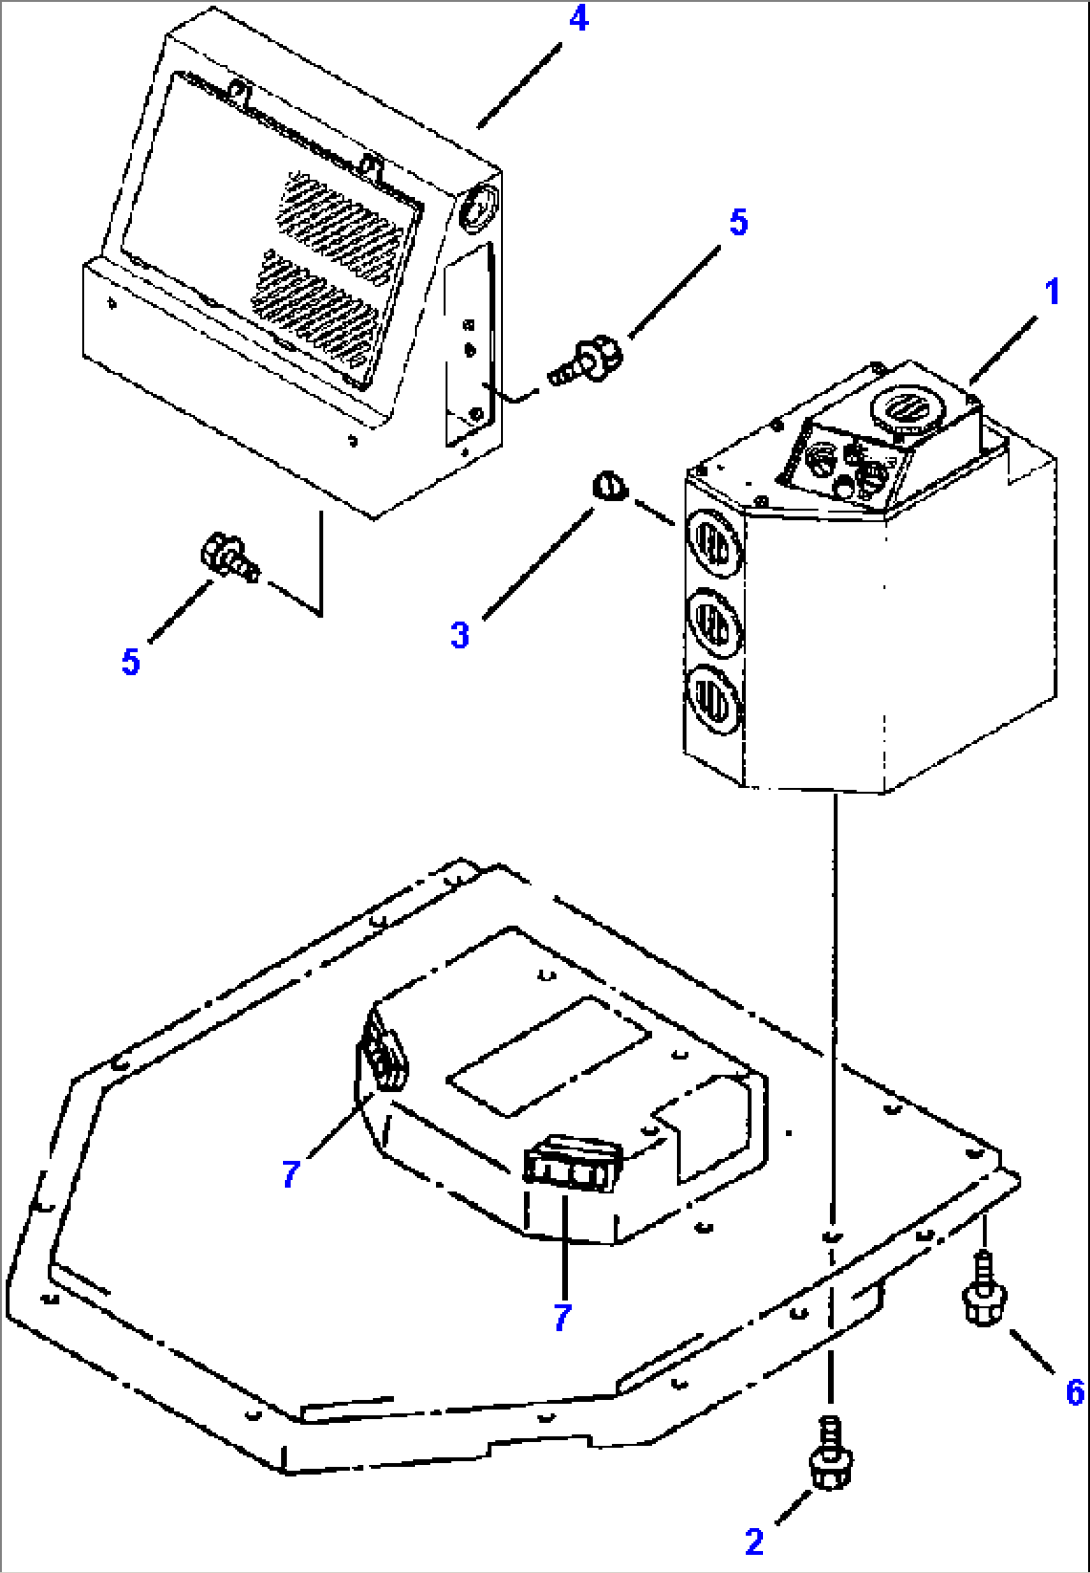 FIG NO. 5552 AIR CONDITIONER - S/N 3053 AND UP OPERATORS COMPARTMENT